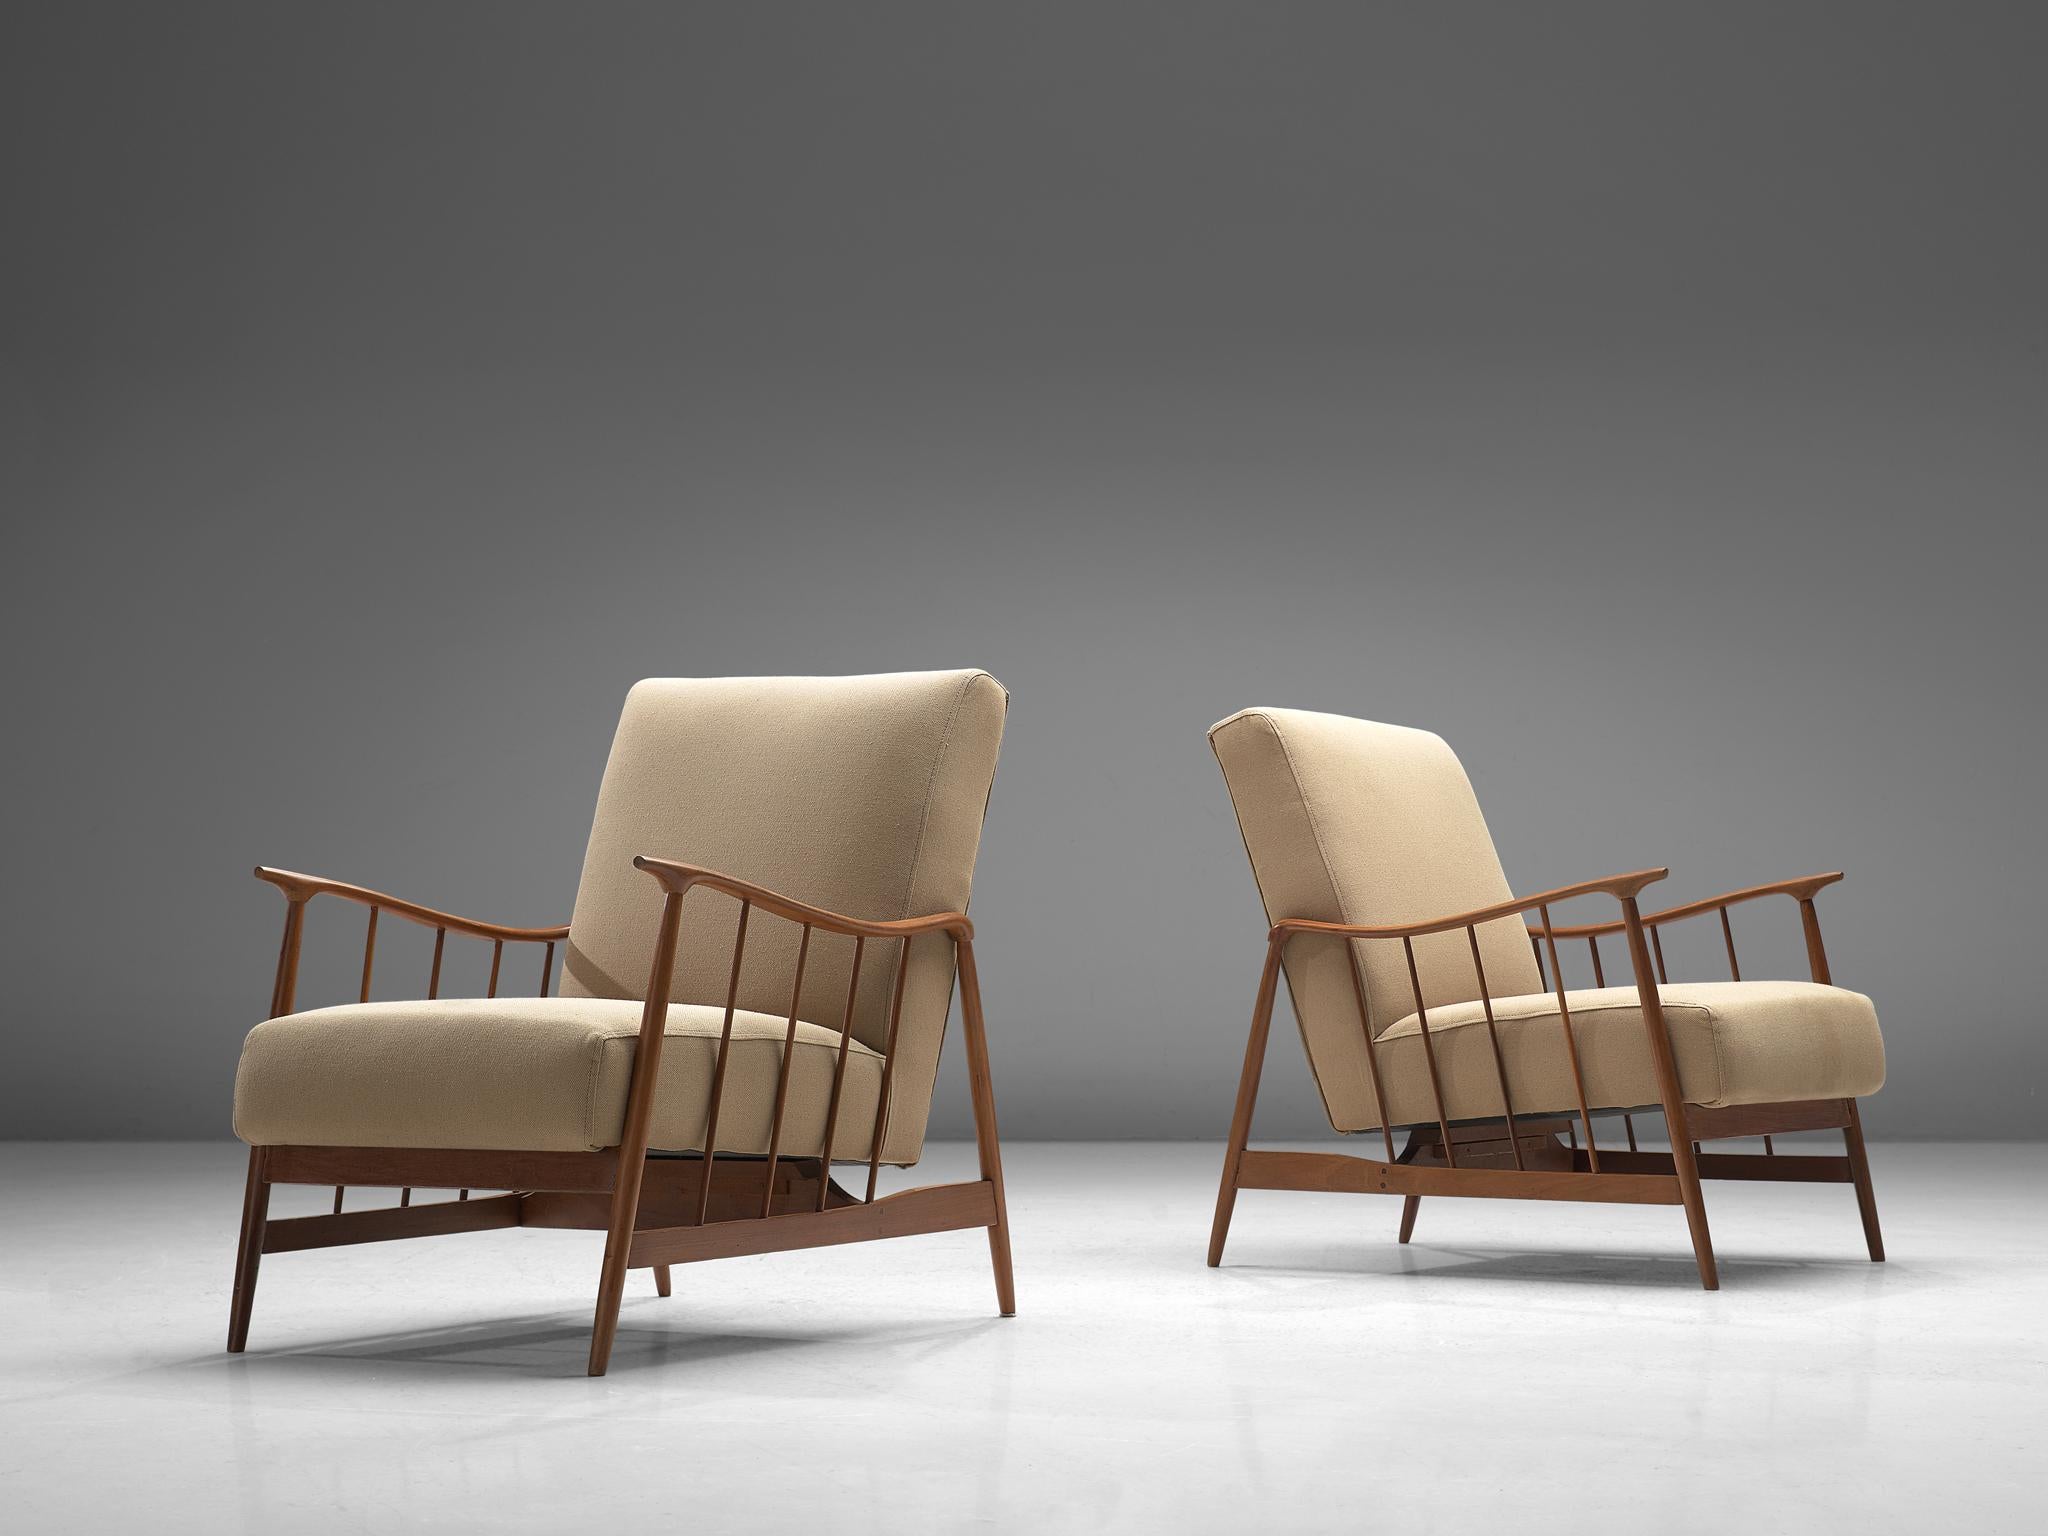 Móveis Cimo, pair of lounge chairs, teak and fabric, Brazil, 1960s

These truly exceptional pair of lounge chairs are designed by the Brazilian company Móveis Cimo. The chairs have an utterly well-balanced construction concealing a great sense of